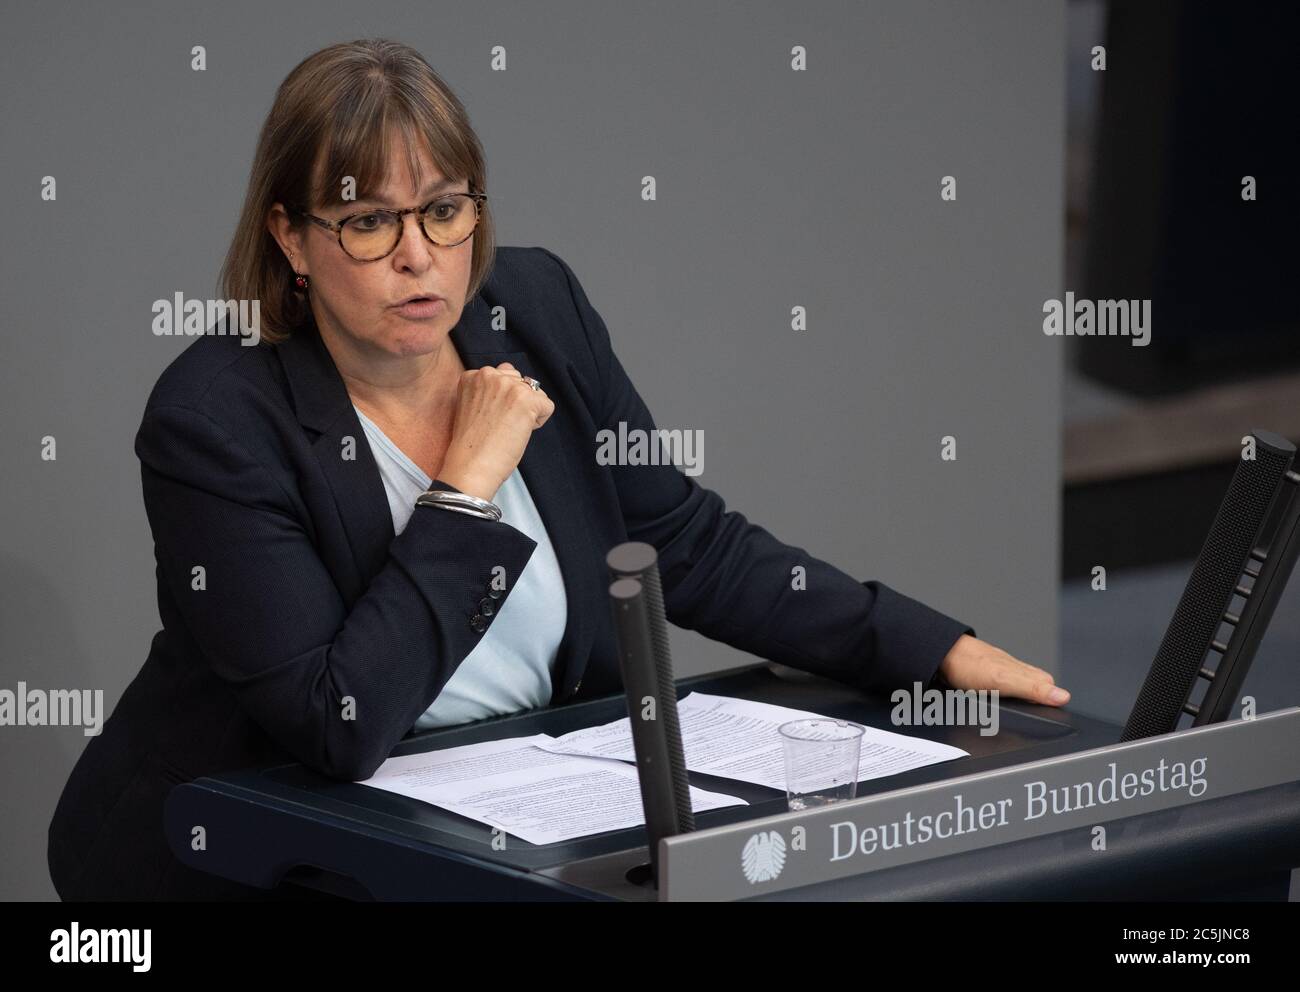 Berlin, Germany. 03rd July, 2020. Heike Hänsel (Die Linke) speaks in the plenary session of the German Bundestag. The main topics of the 171st session of the 19th legislative period are the adoption of the Coal Exit Act, a topical hour on the excesses of violence in Stuttgart, as well as debates on electoral law reform, the protection of electronic patient data, the welfare of farm animals and the German chairmanship of the UN Security Council. Credit: Christophe Gateau/dpa/Alamy Live News Stock Photo